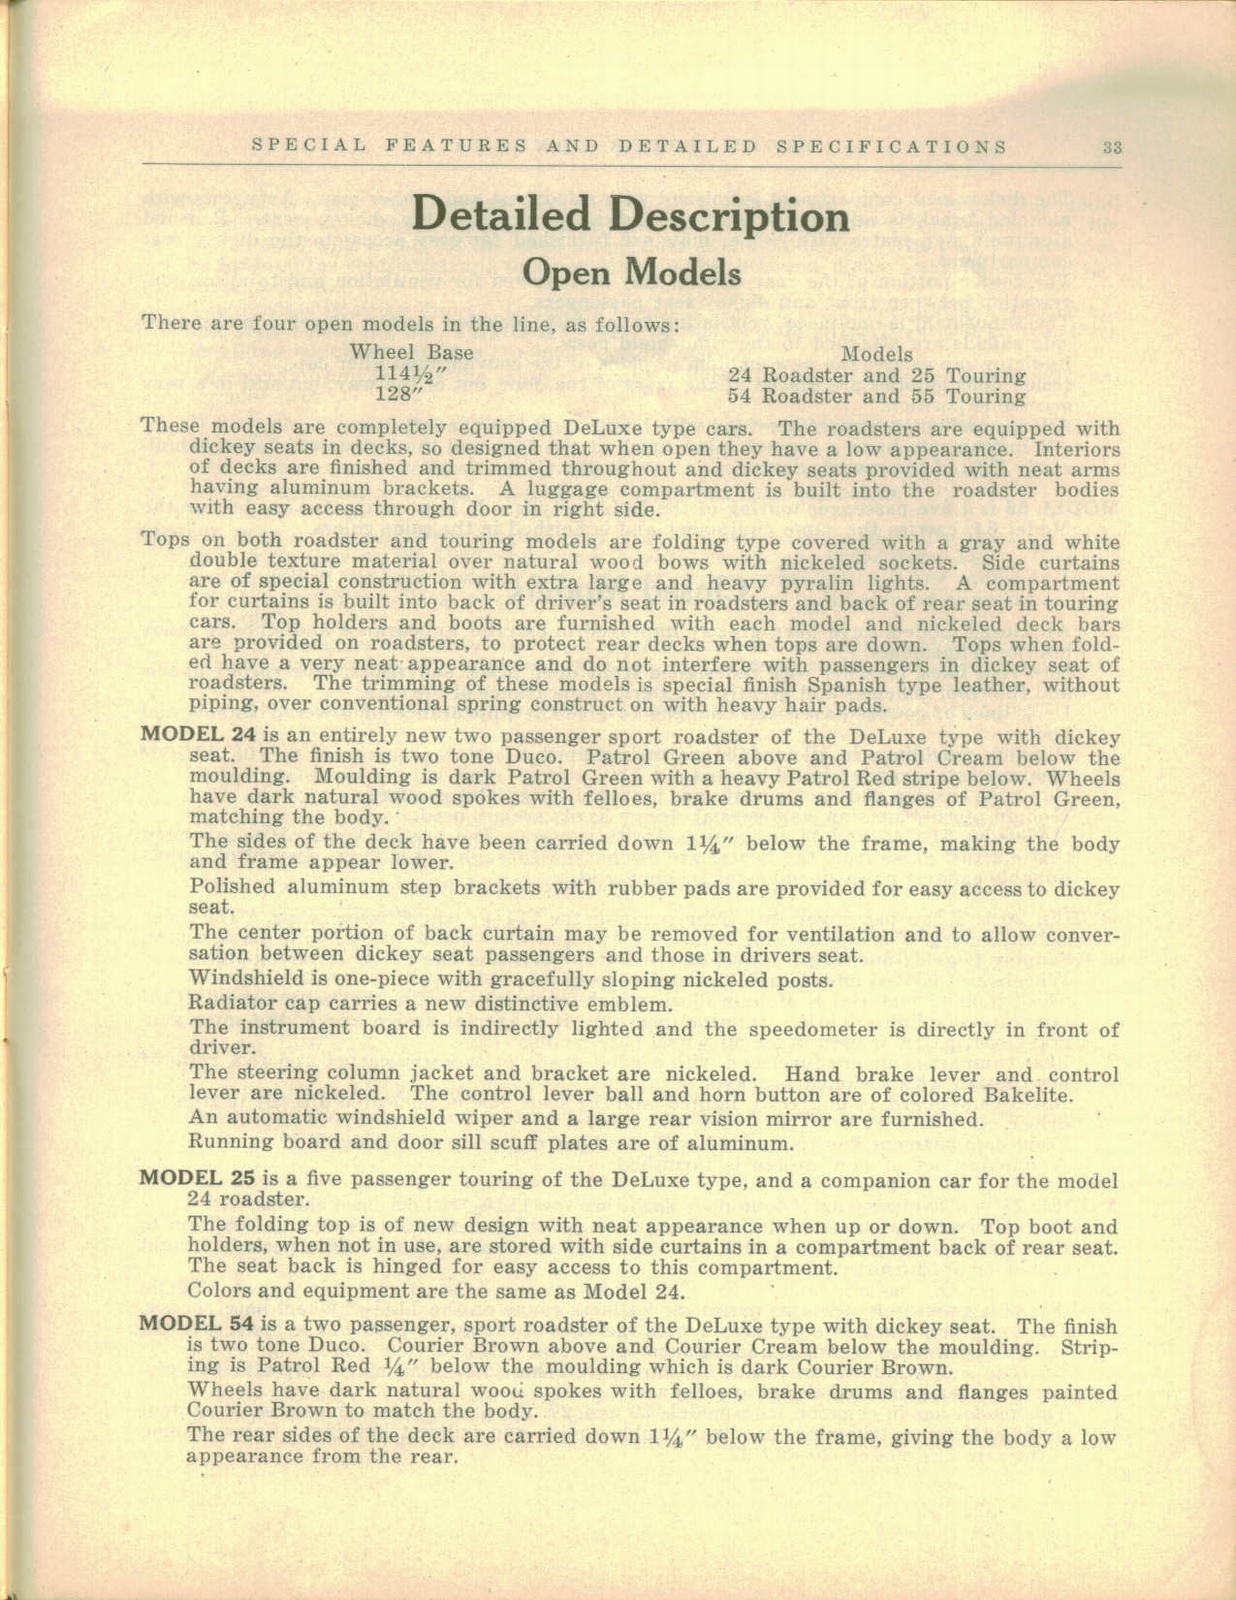 n_1927 Buick Special Features and Specs-33.jpg